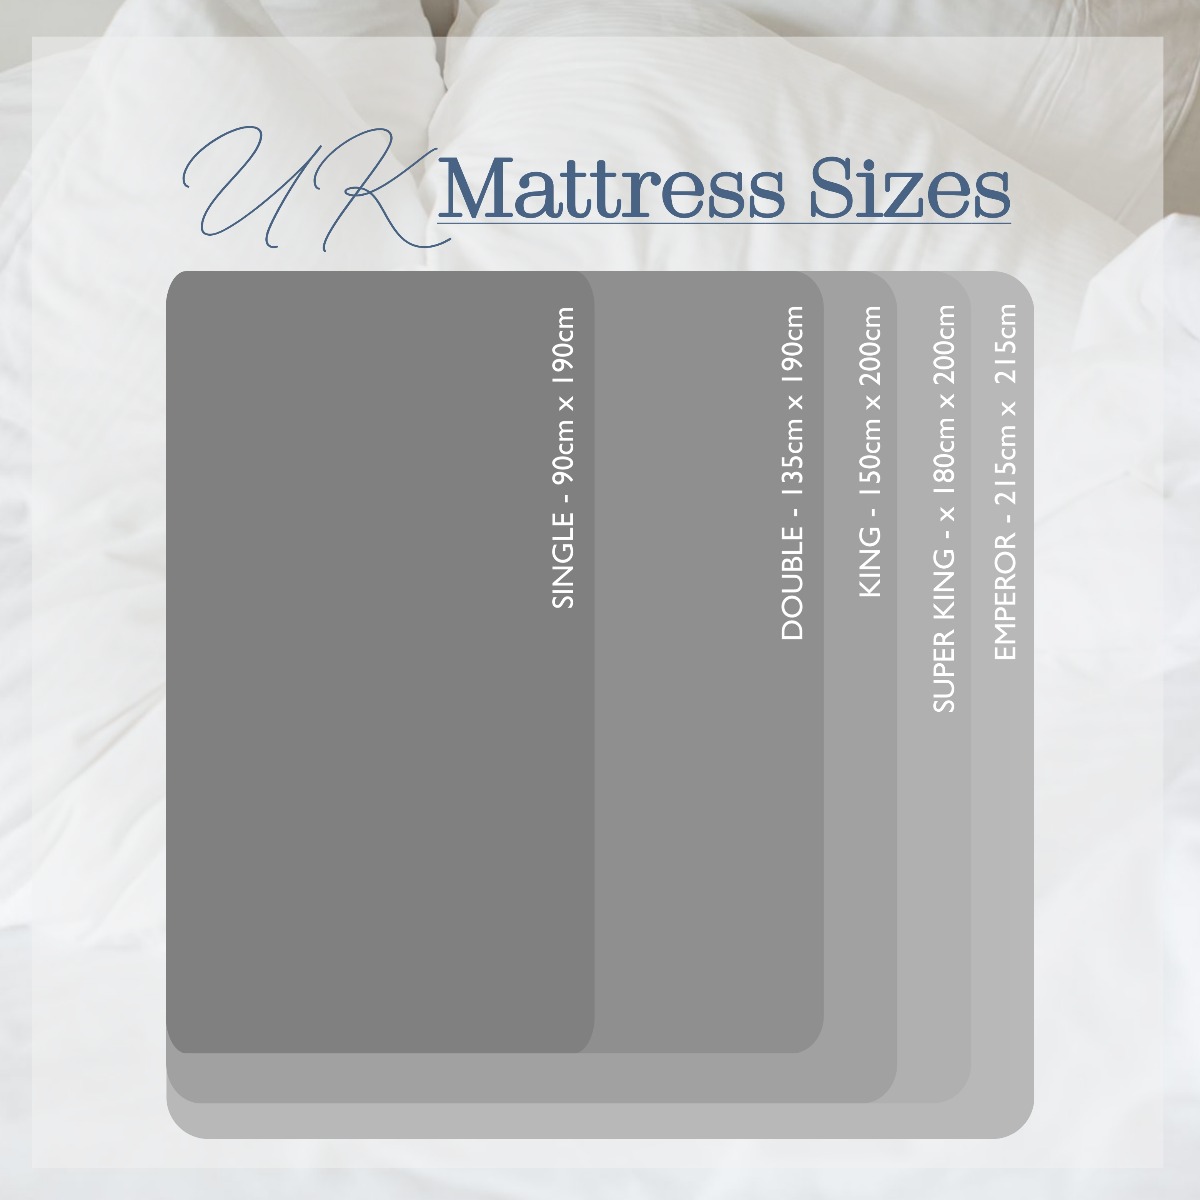 Your Guide To Uk Mattress Sizes The, What Is Bigger Than A Super King Size Bed Uk